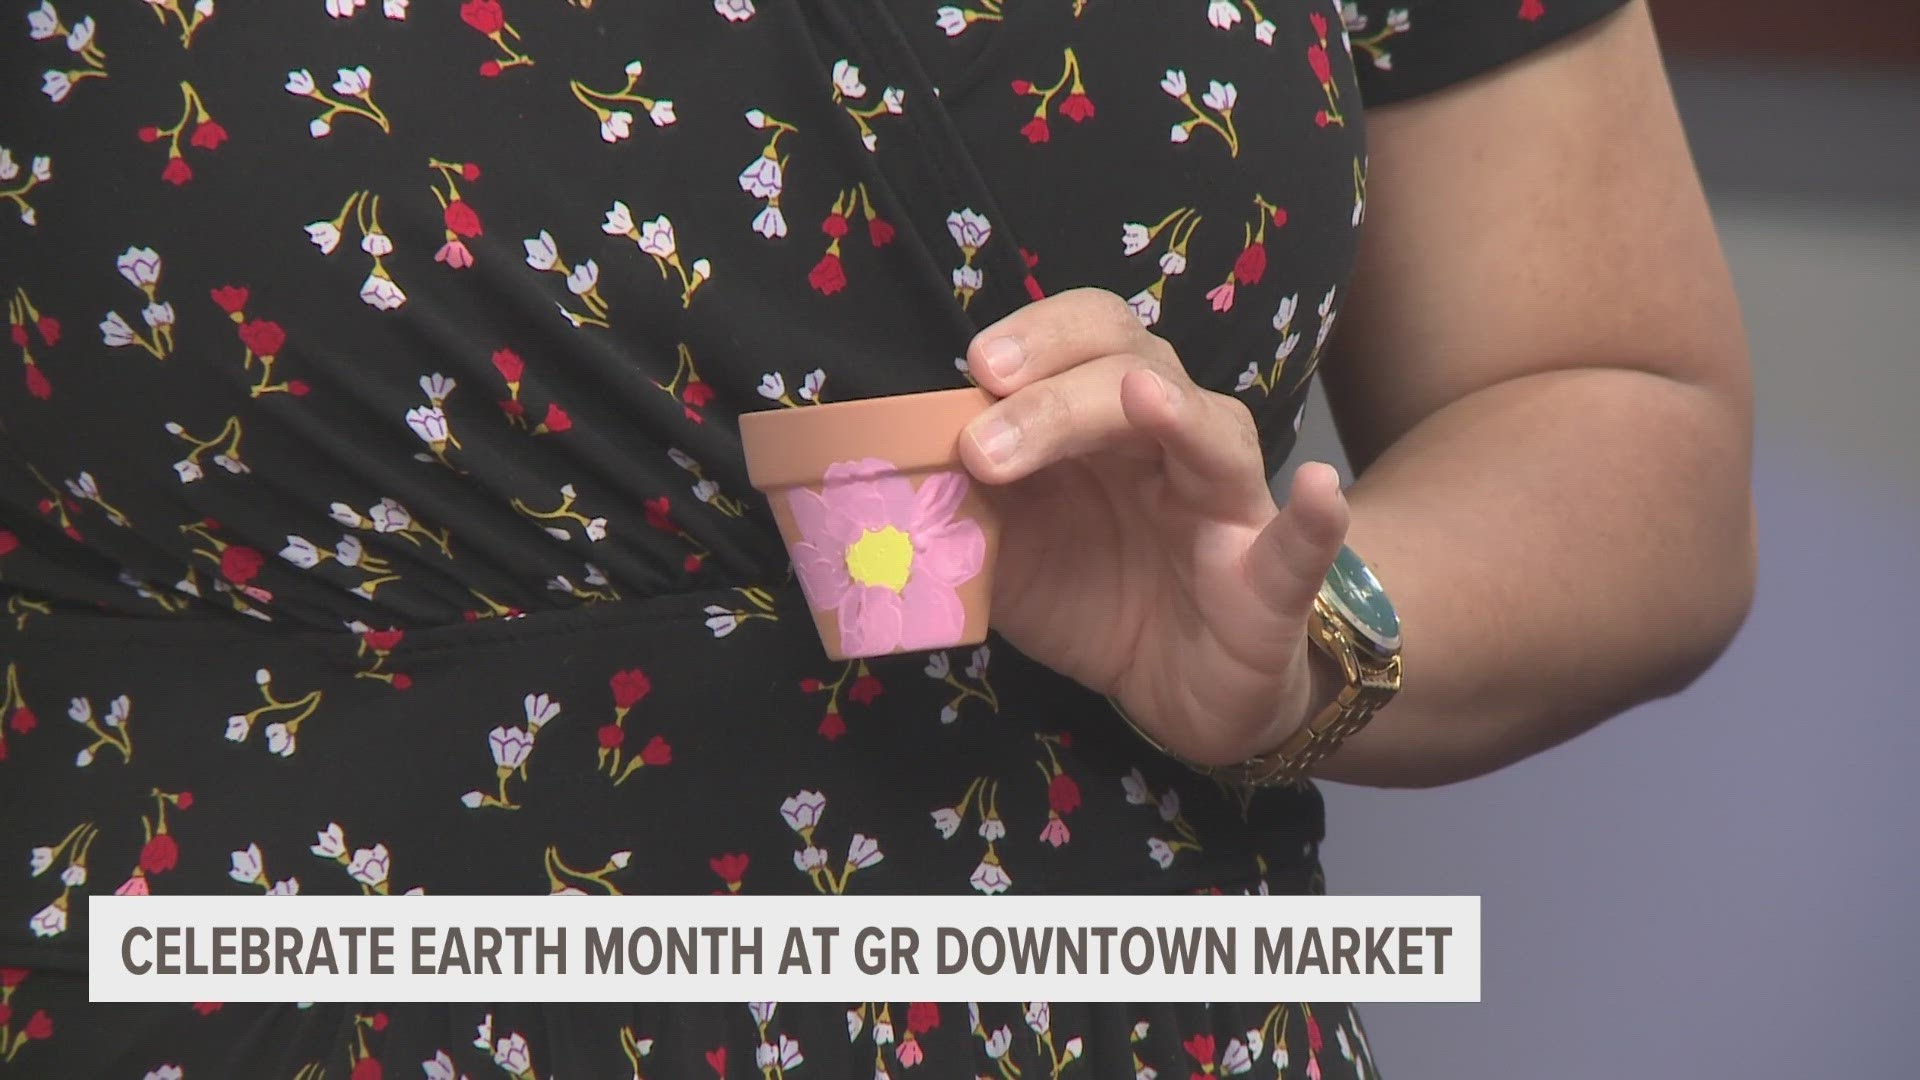 The Grand Rapids Downtown Market is celebrating Earth Day with tons of fun activities for anyone looking to celebrate our planet.